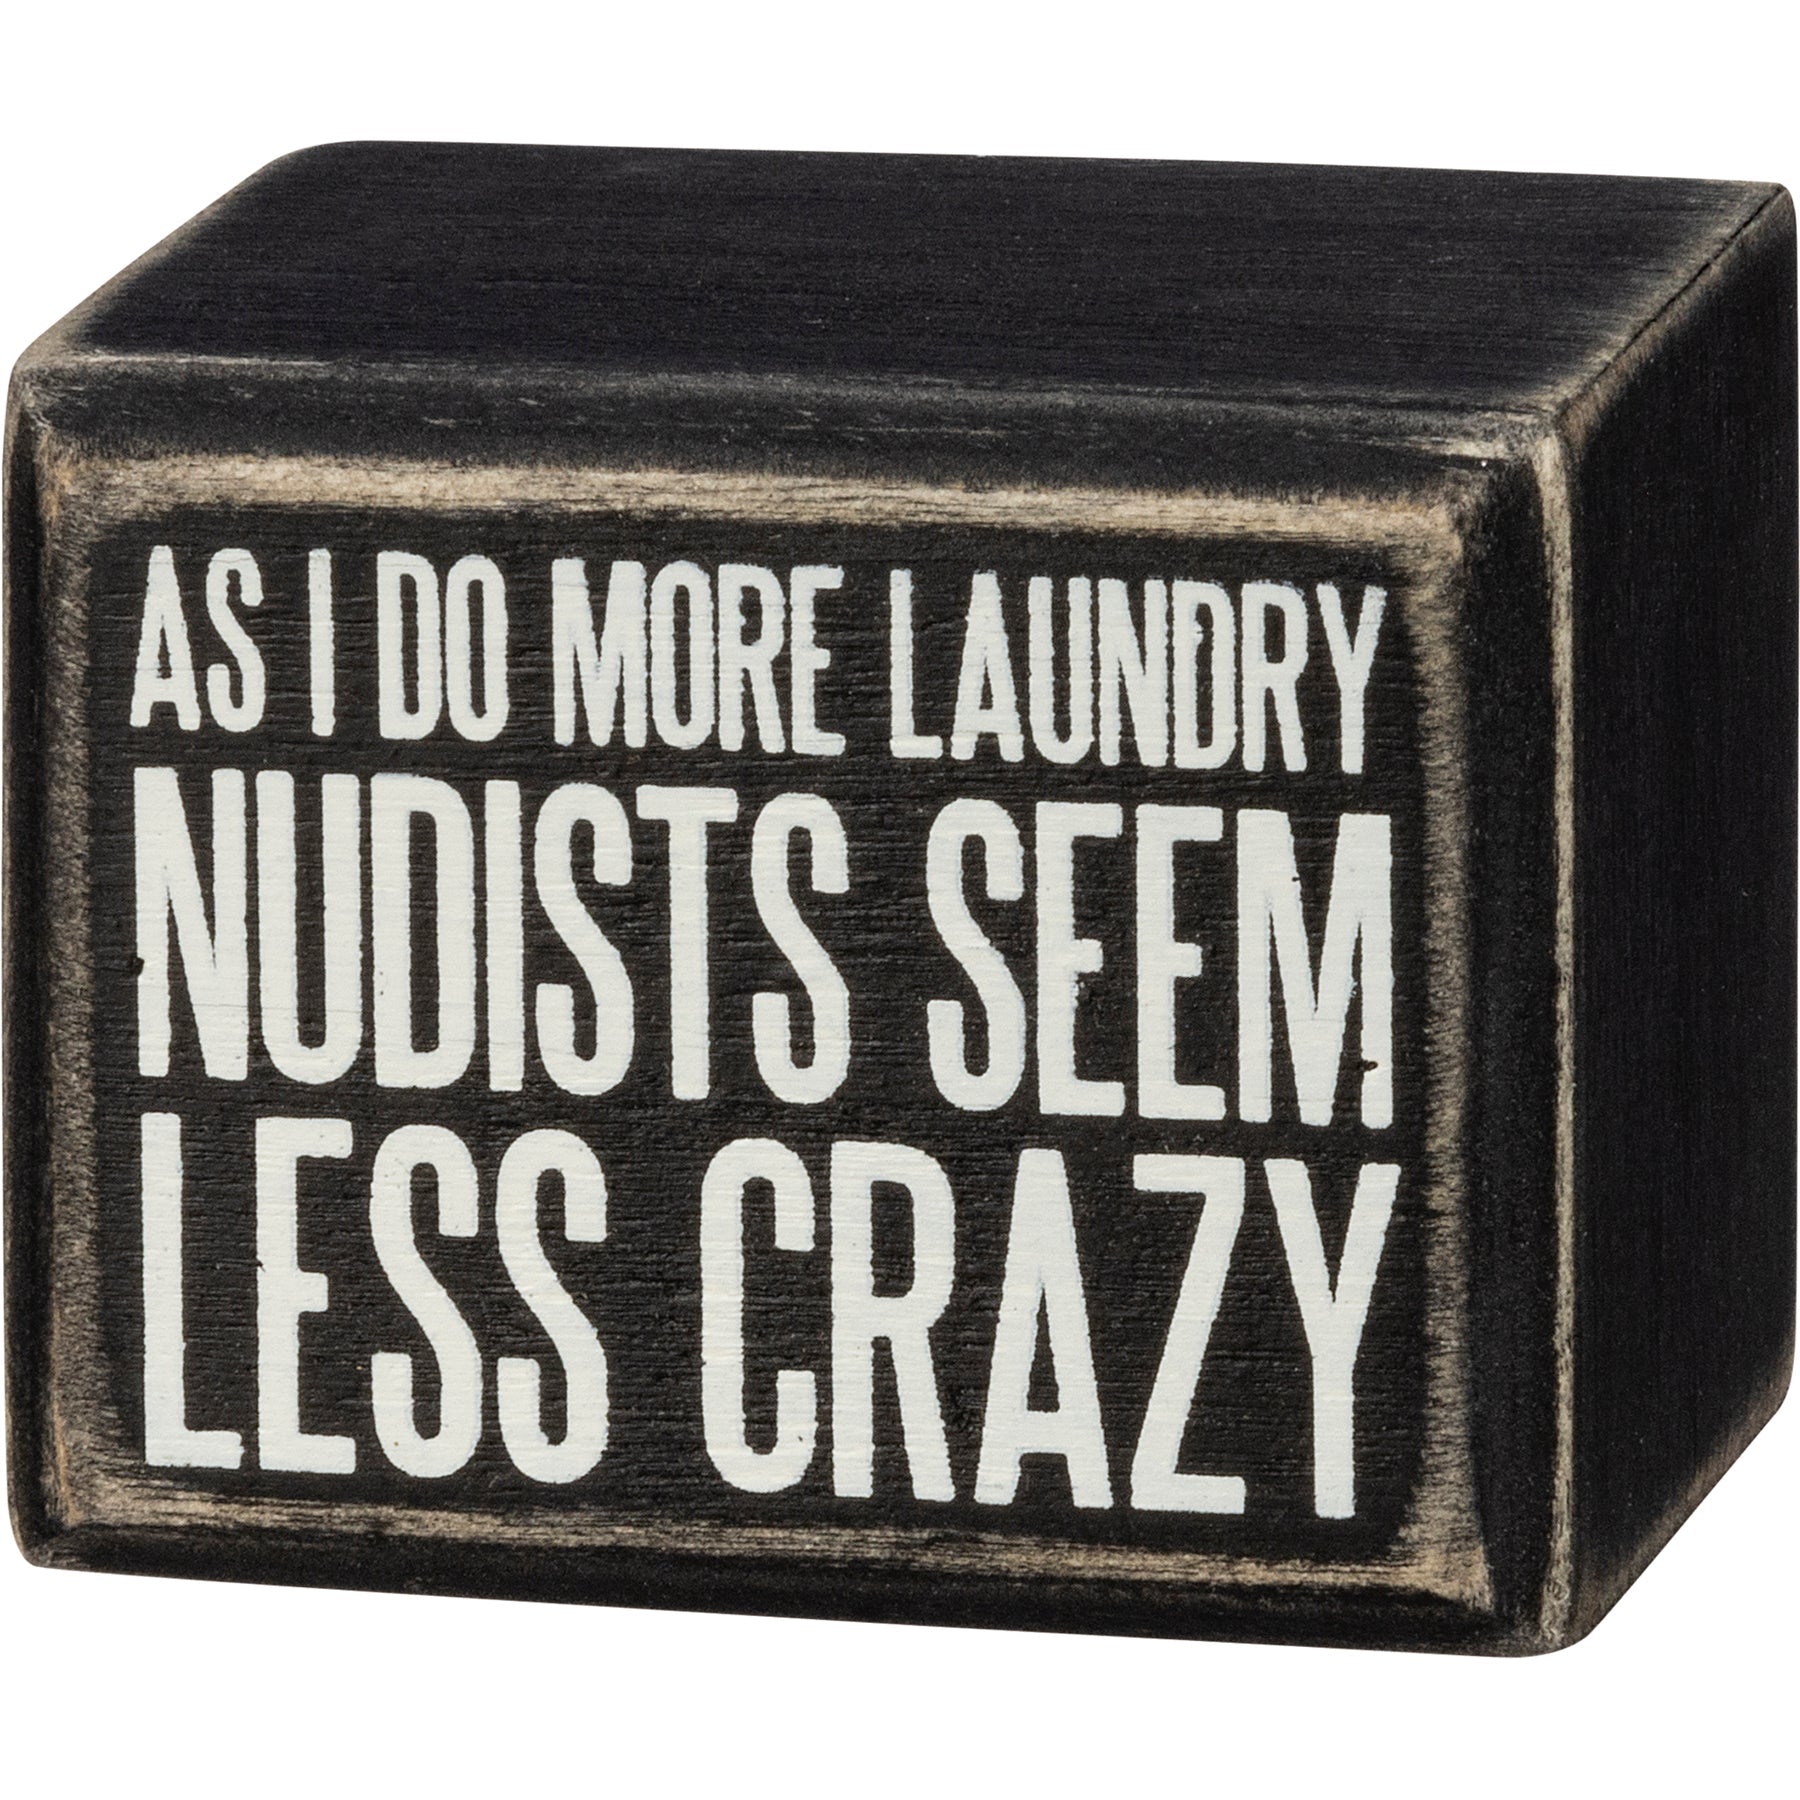 As I Do More Laundry Nudists Seem Less Crazy Box Sign in Black with White Lettering